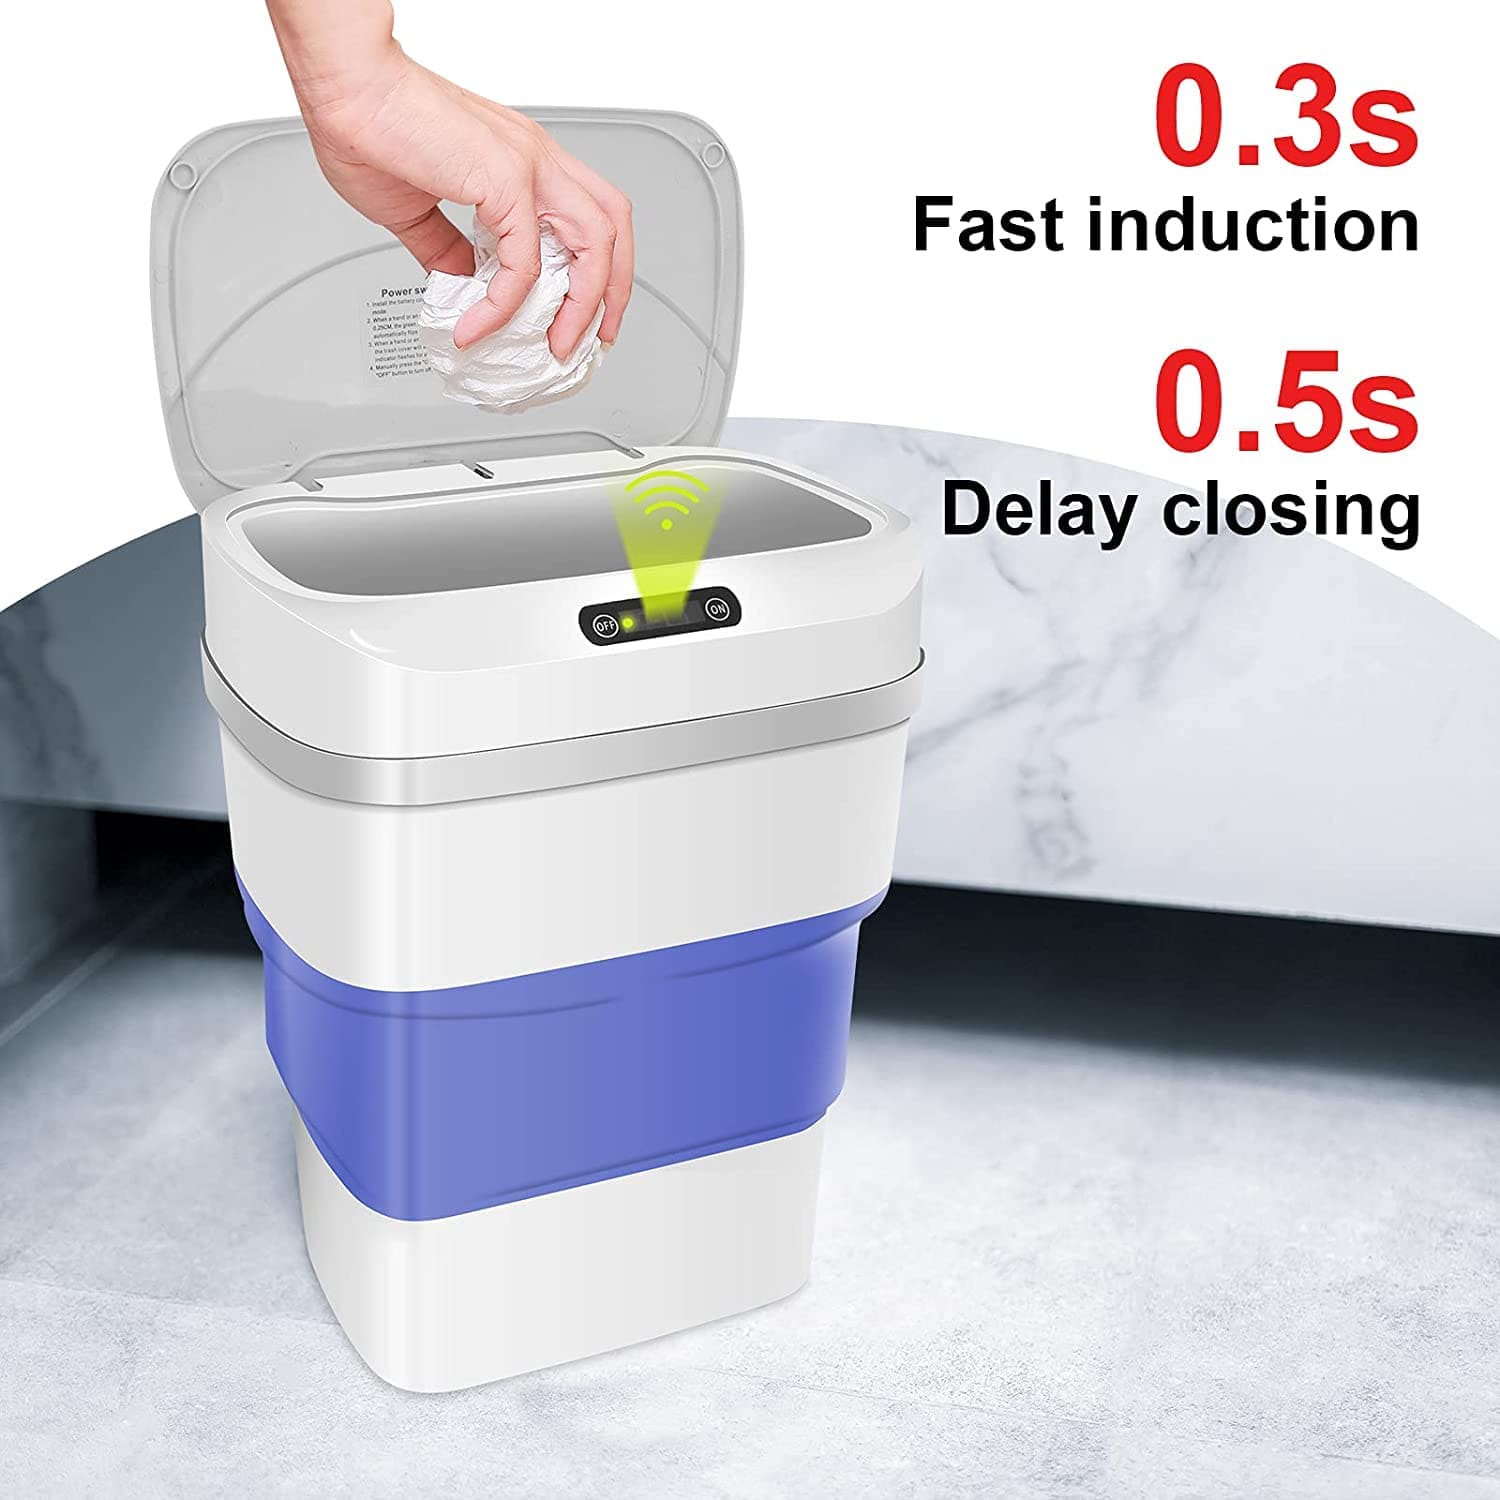 Smart Trash Can With Lid, Touchless Automatic Motion Sensor Trash Bin, Foldable Mini Trash Can, Collapsible Trash Bin, Creative  Household Bathroom Garbage Storage Box, Waste Bin Garbage Can